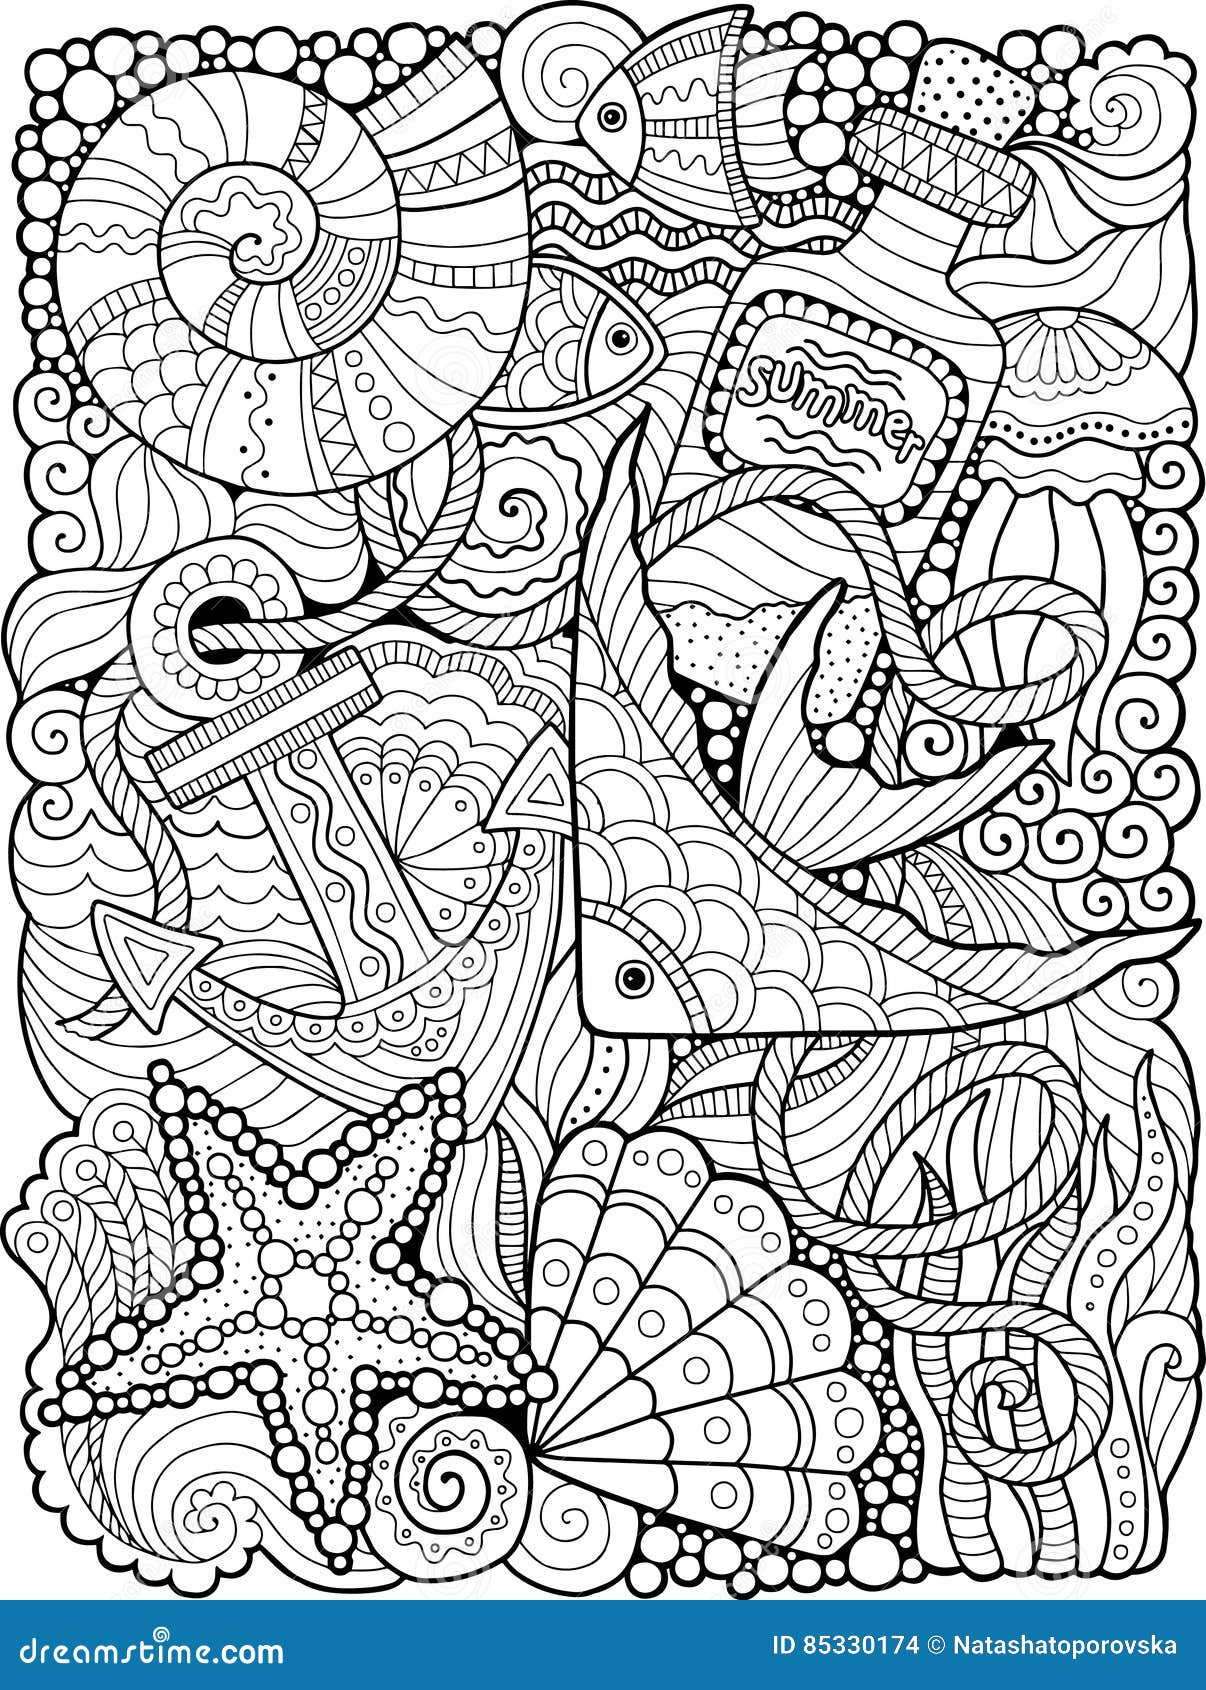  coloring book. coloring book for adult. summers sea